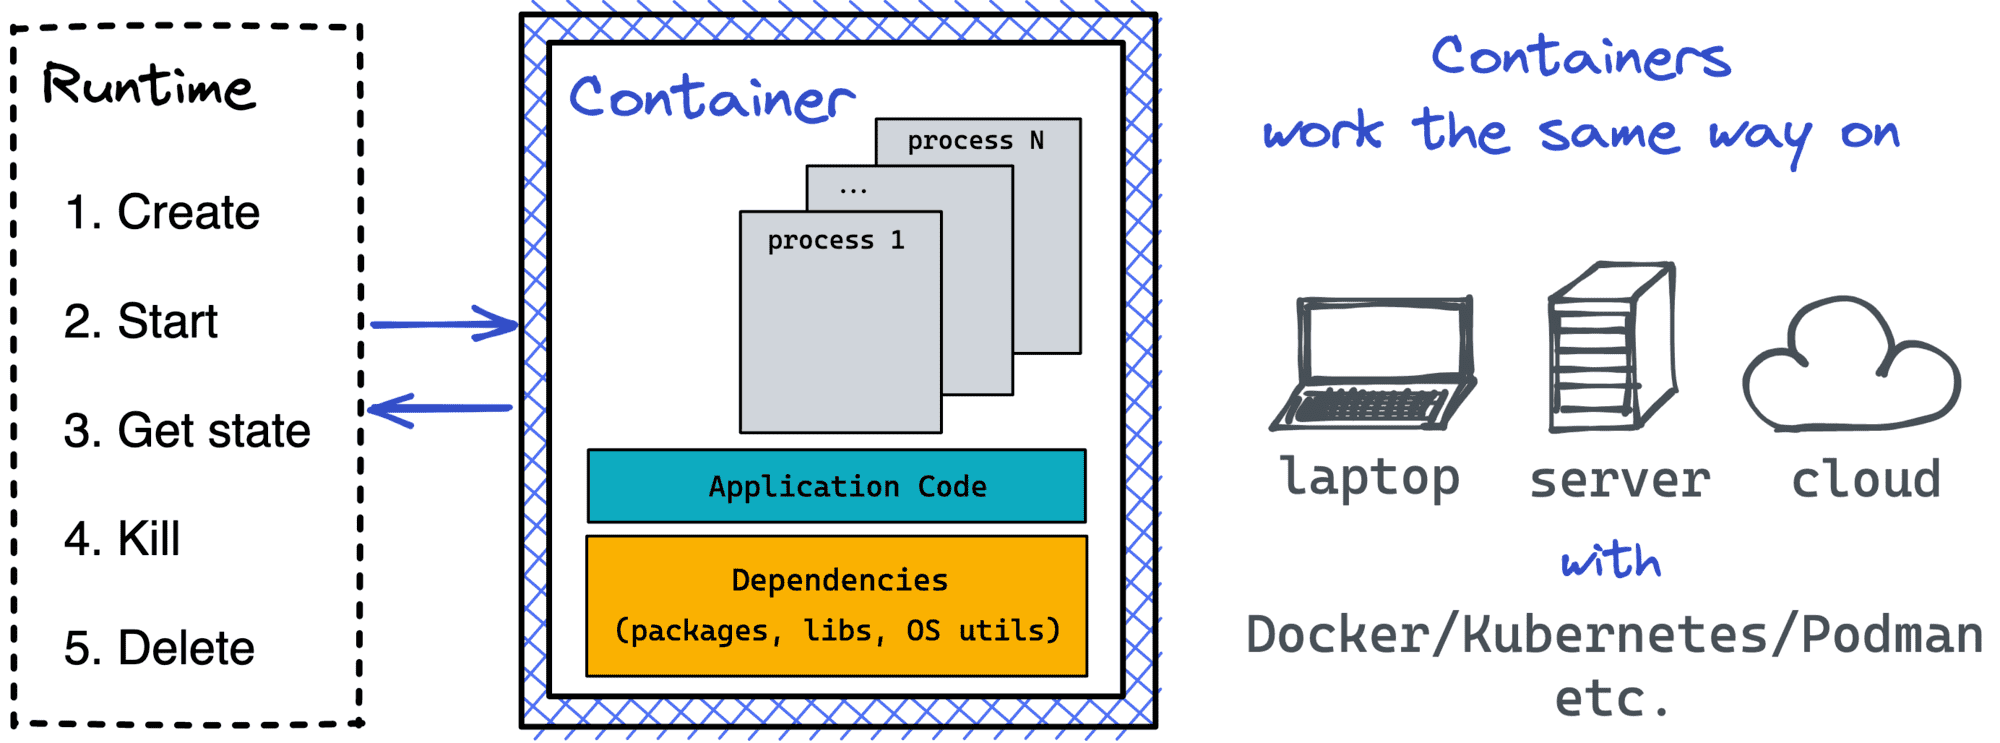 Containers work the same way on developer's laptop, CI/CD servers, and Kubernetes clusters running in the cloud.